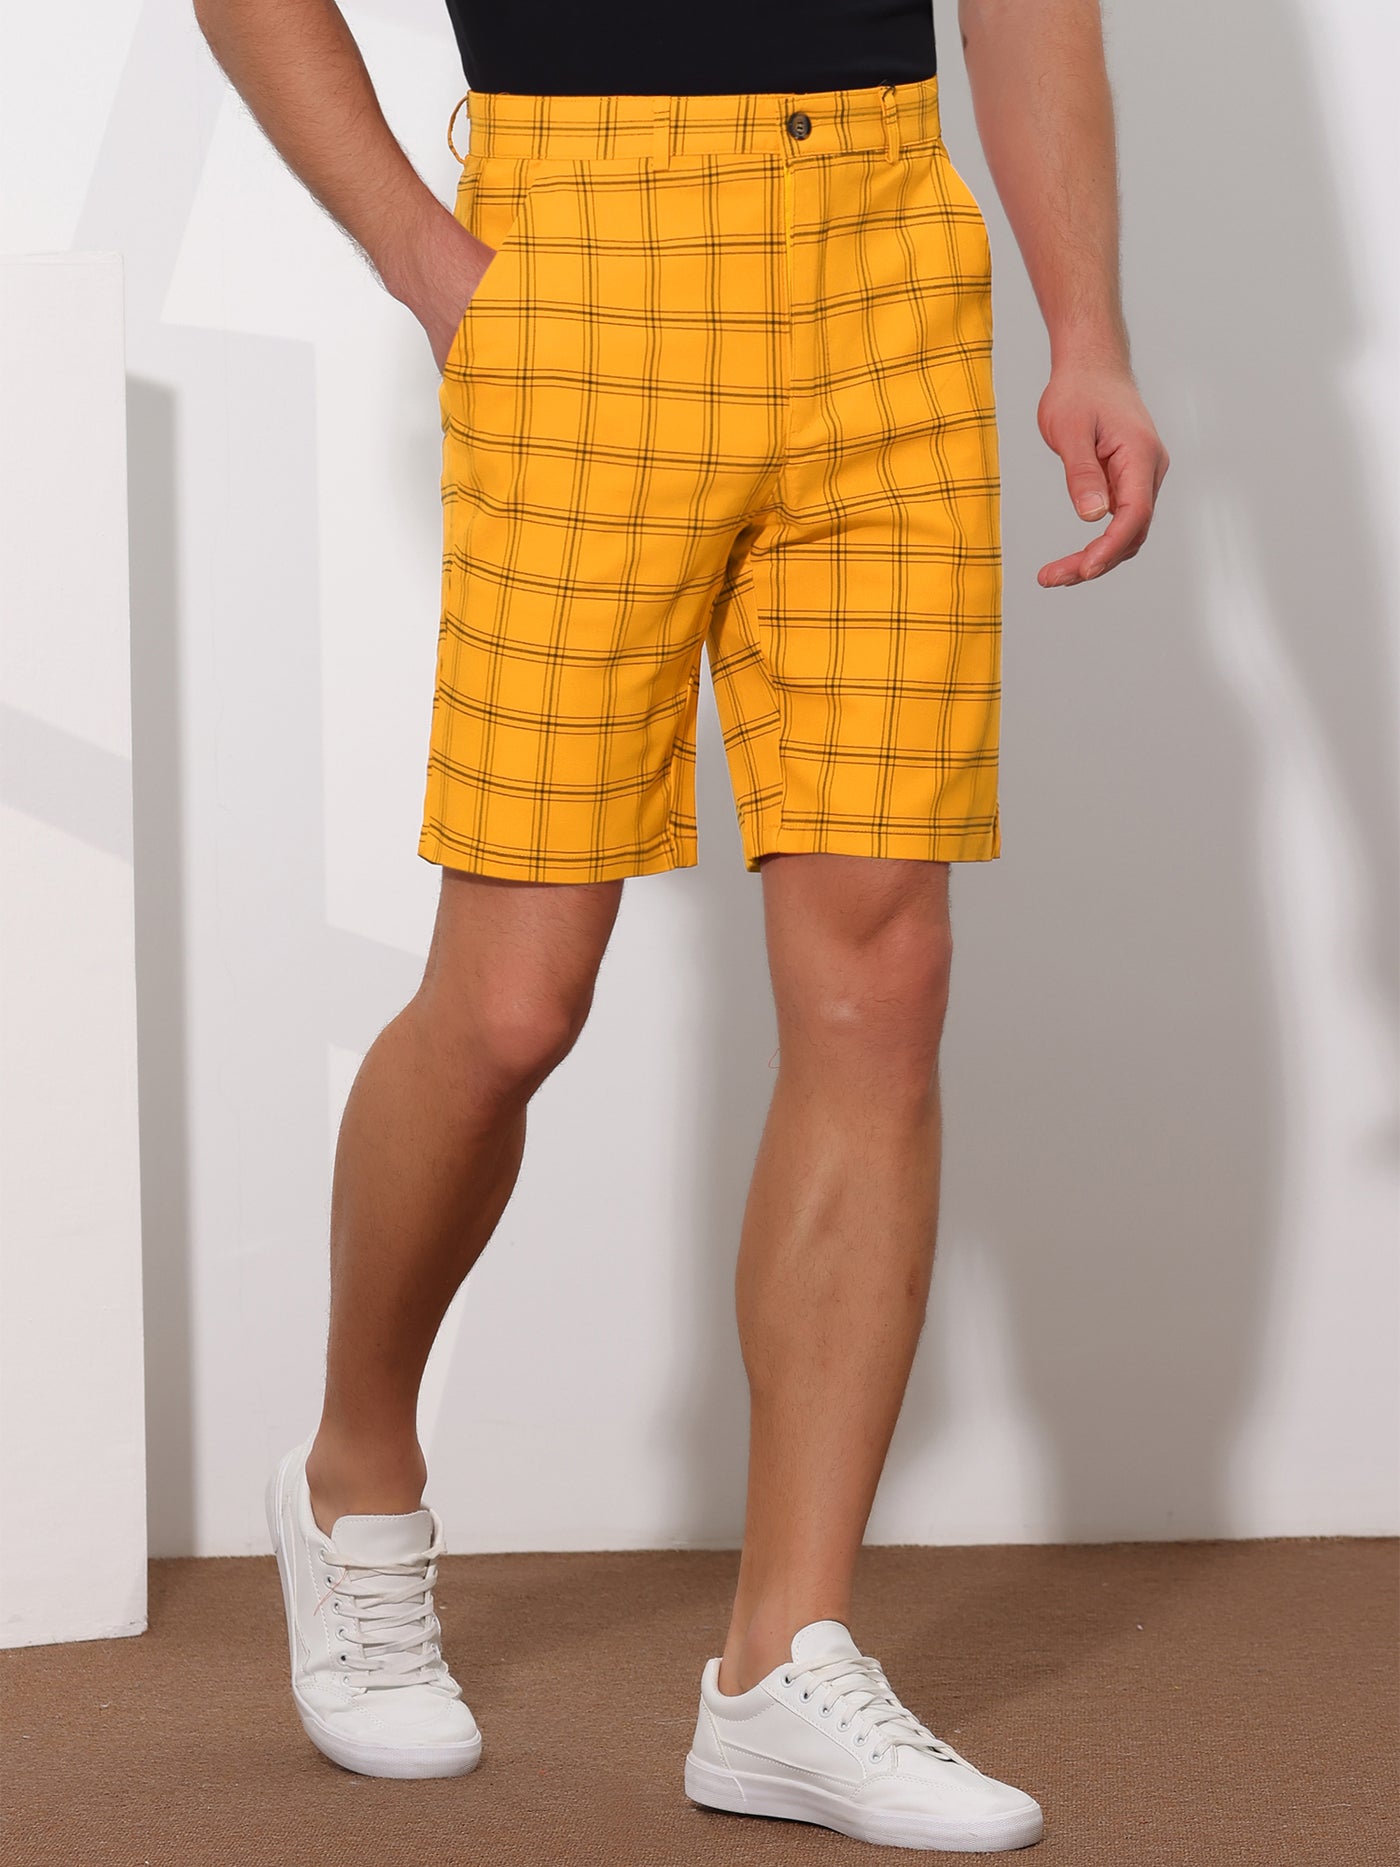 Bublédon Plaid Summer Flat Front Checked Patterned Dress Shorts